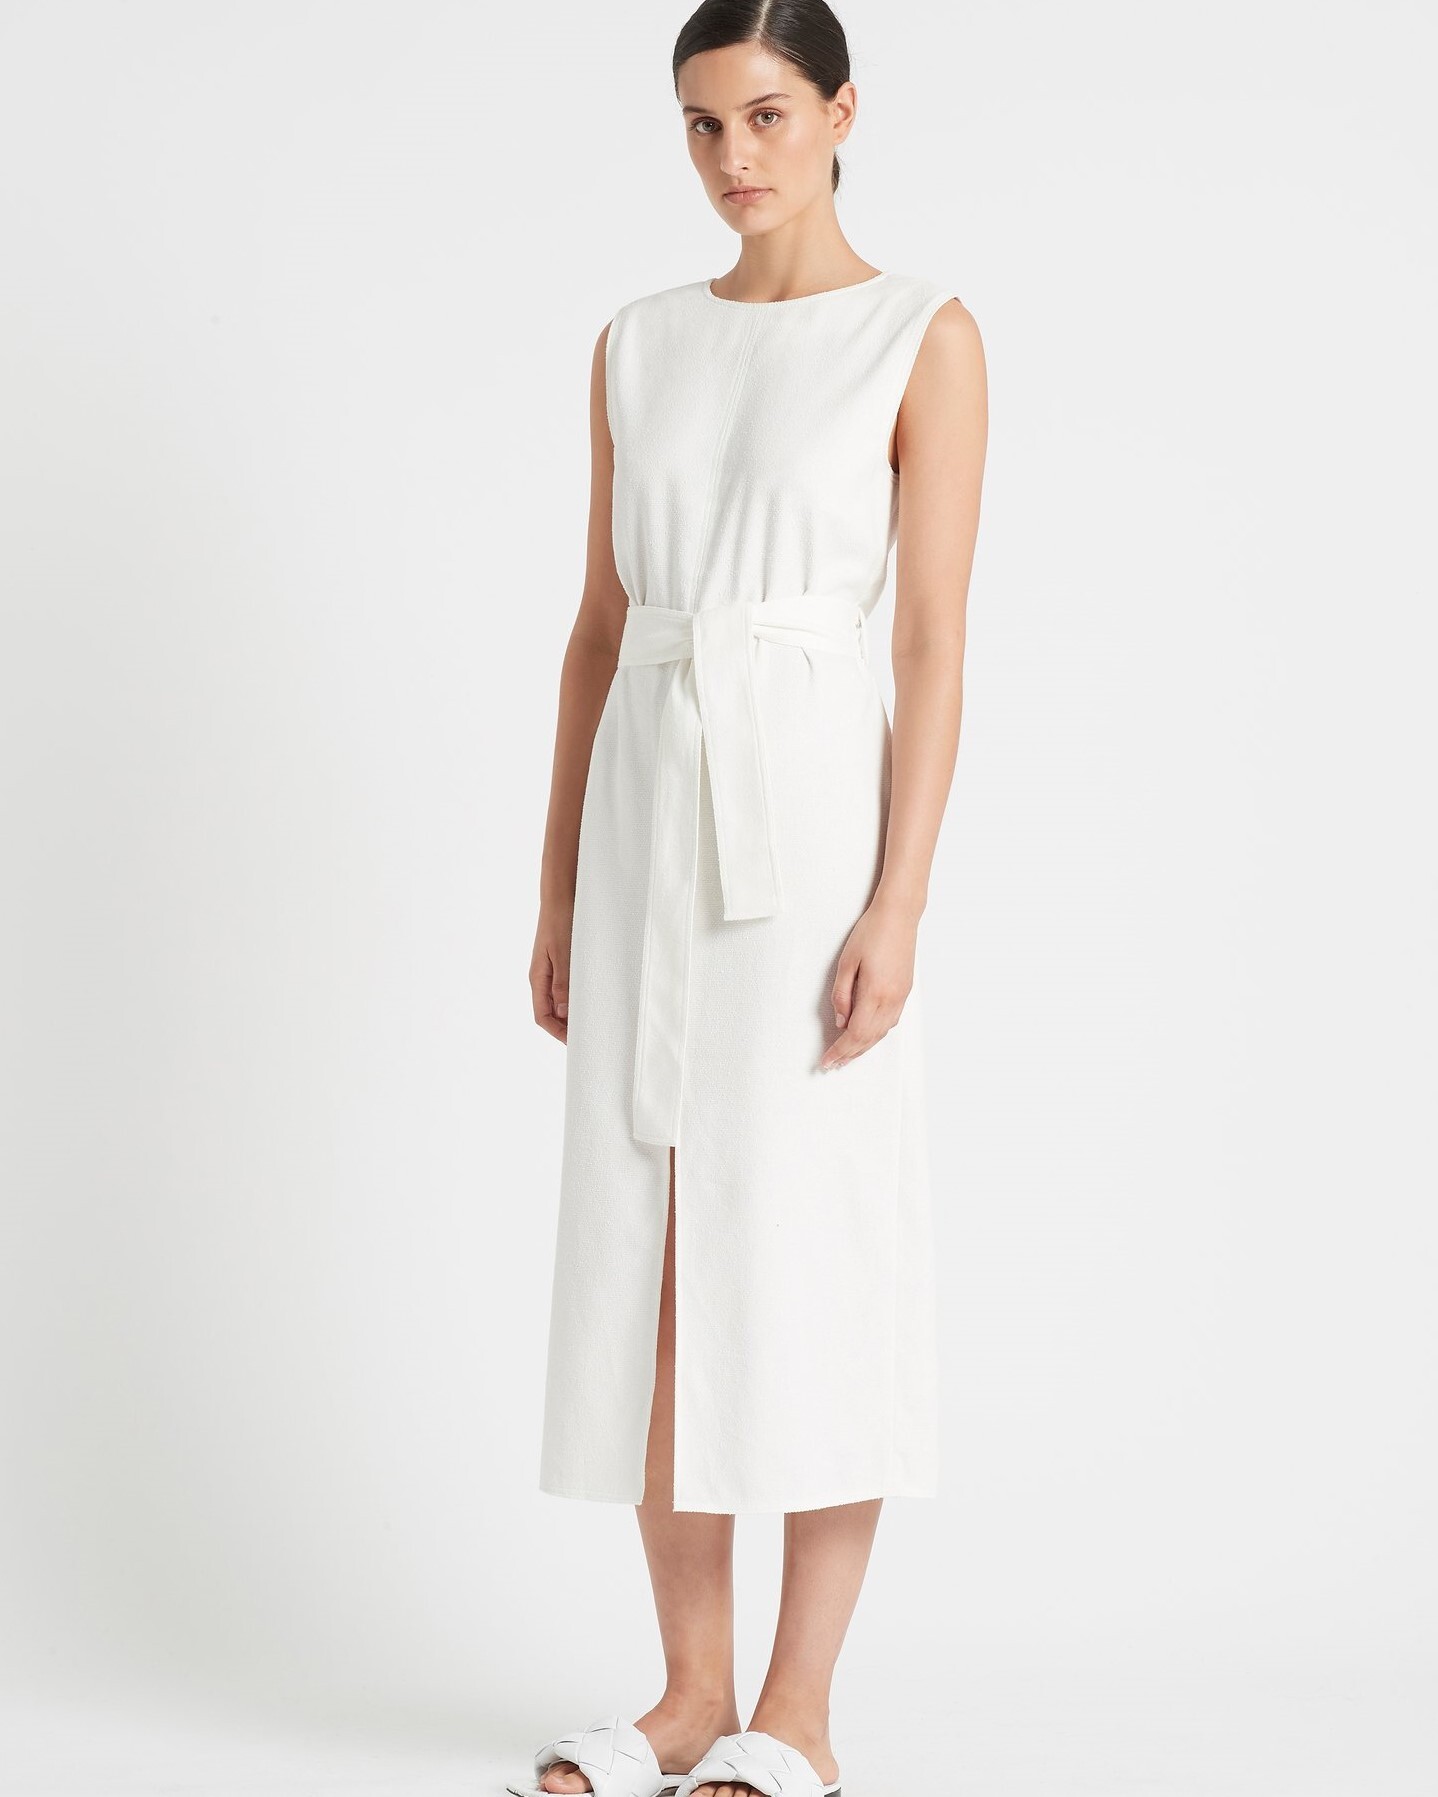 YVES MIDI DRESS (IVORY)- SIR SUMMER 21 Boxing Day Sale